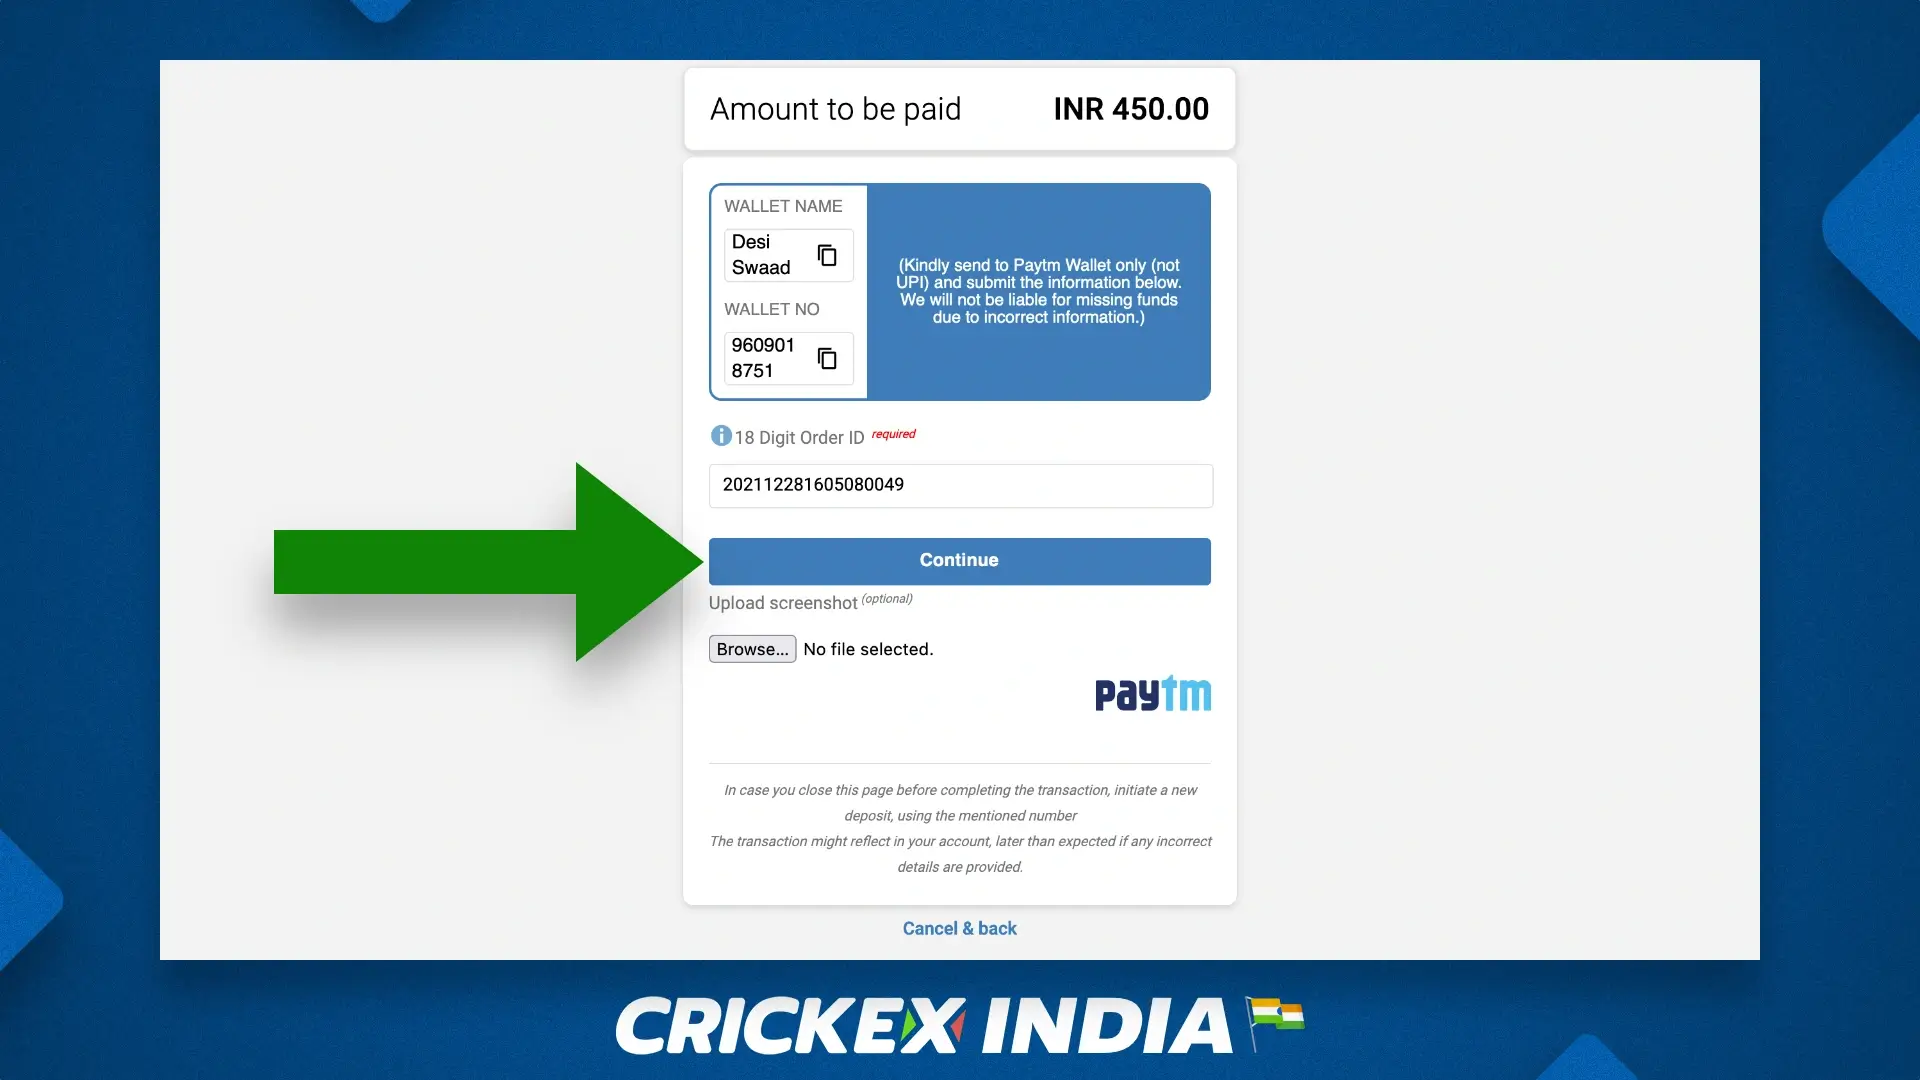 Confirmation of the Crickex deposit operation